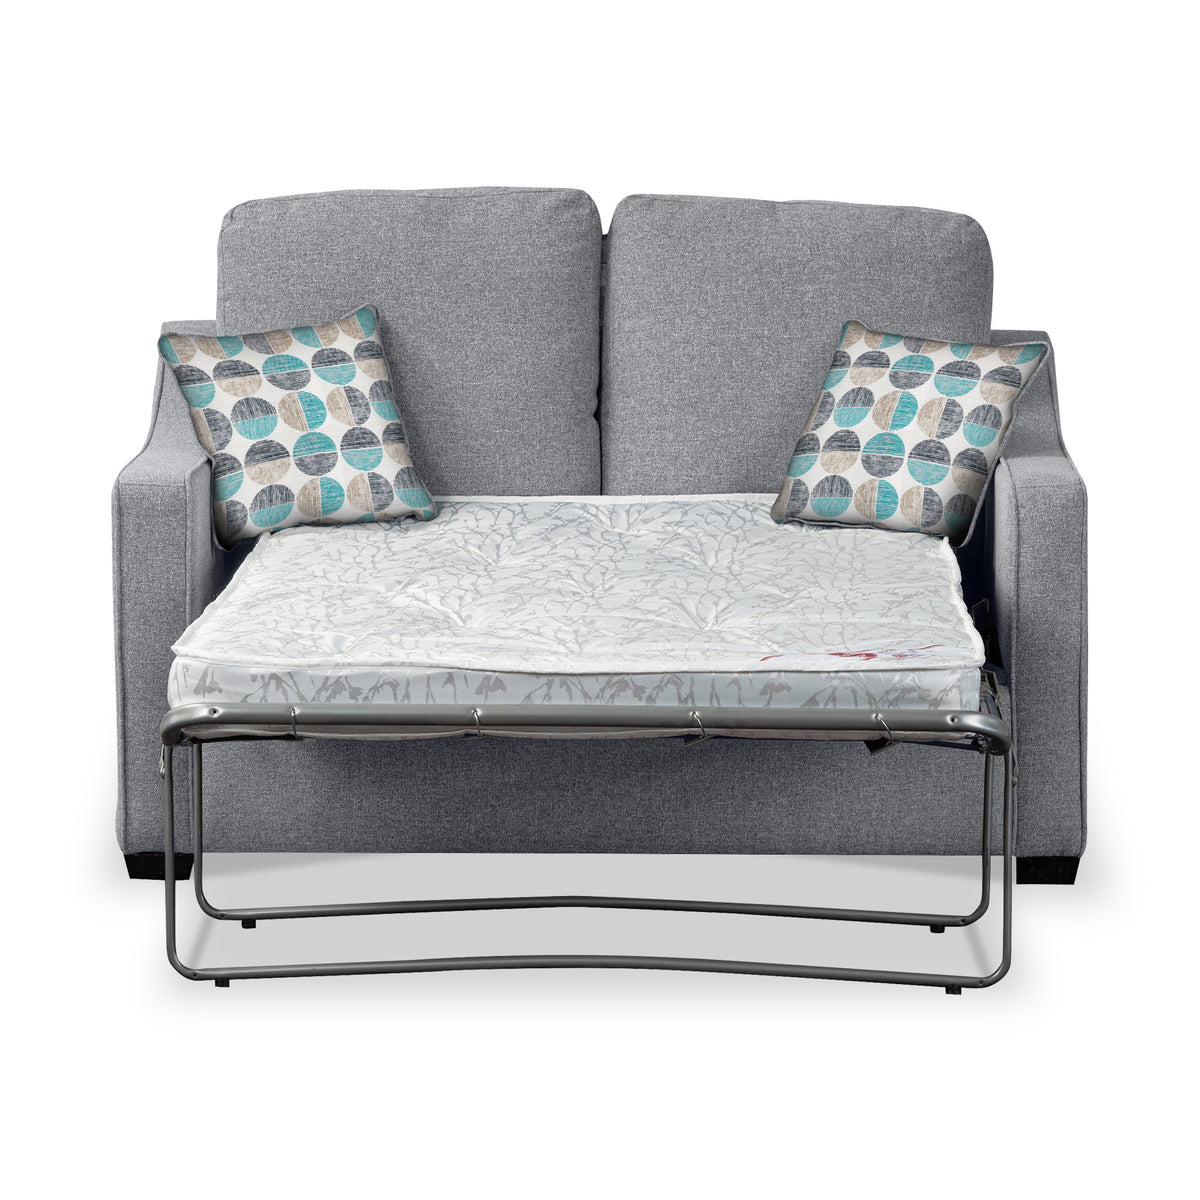 Charlcote Silver Faux Linen 2 Seater Sofabed with Duck Egg Scatter Cushions from Roseland Furniture